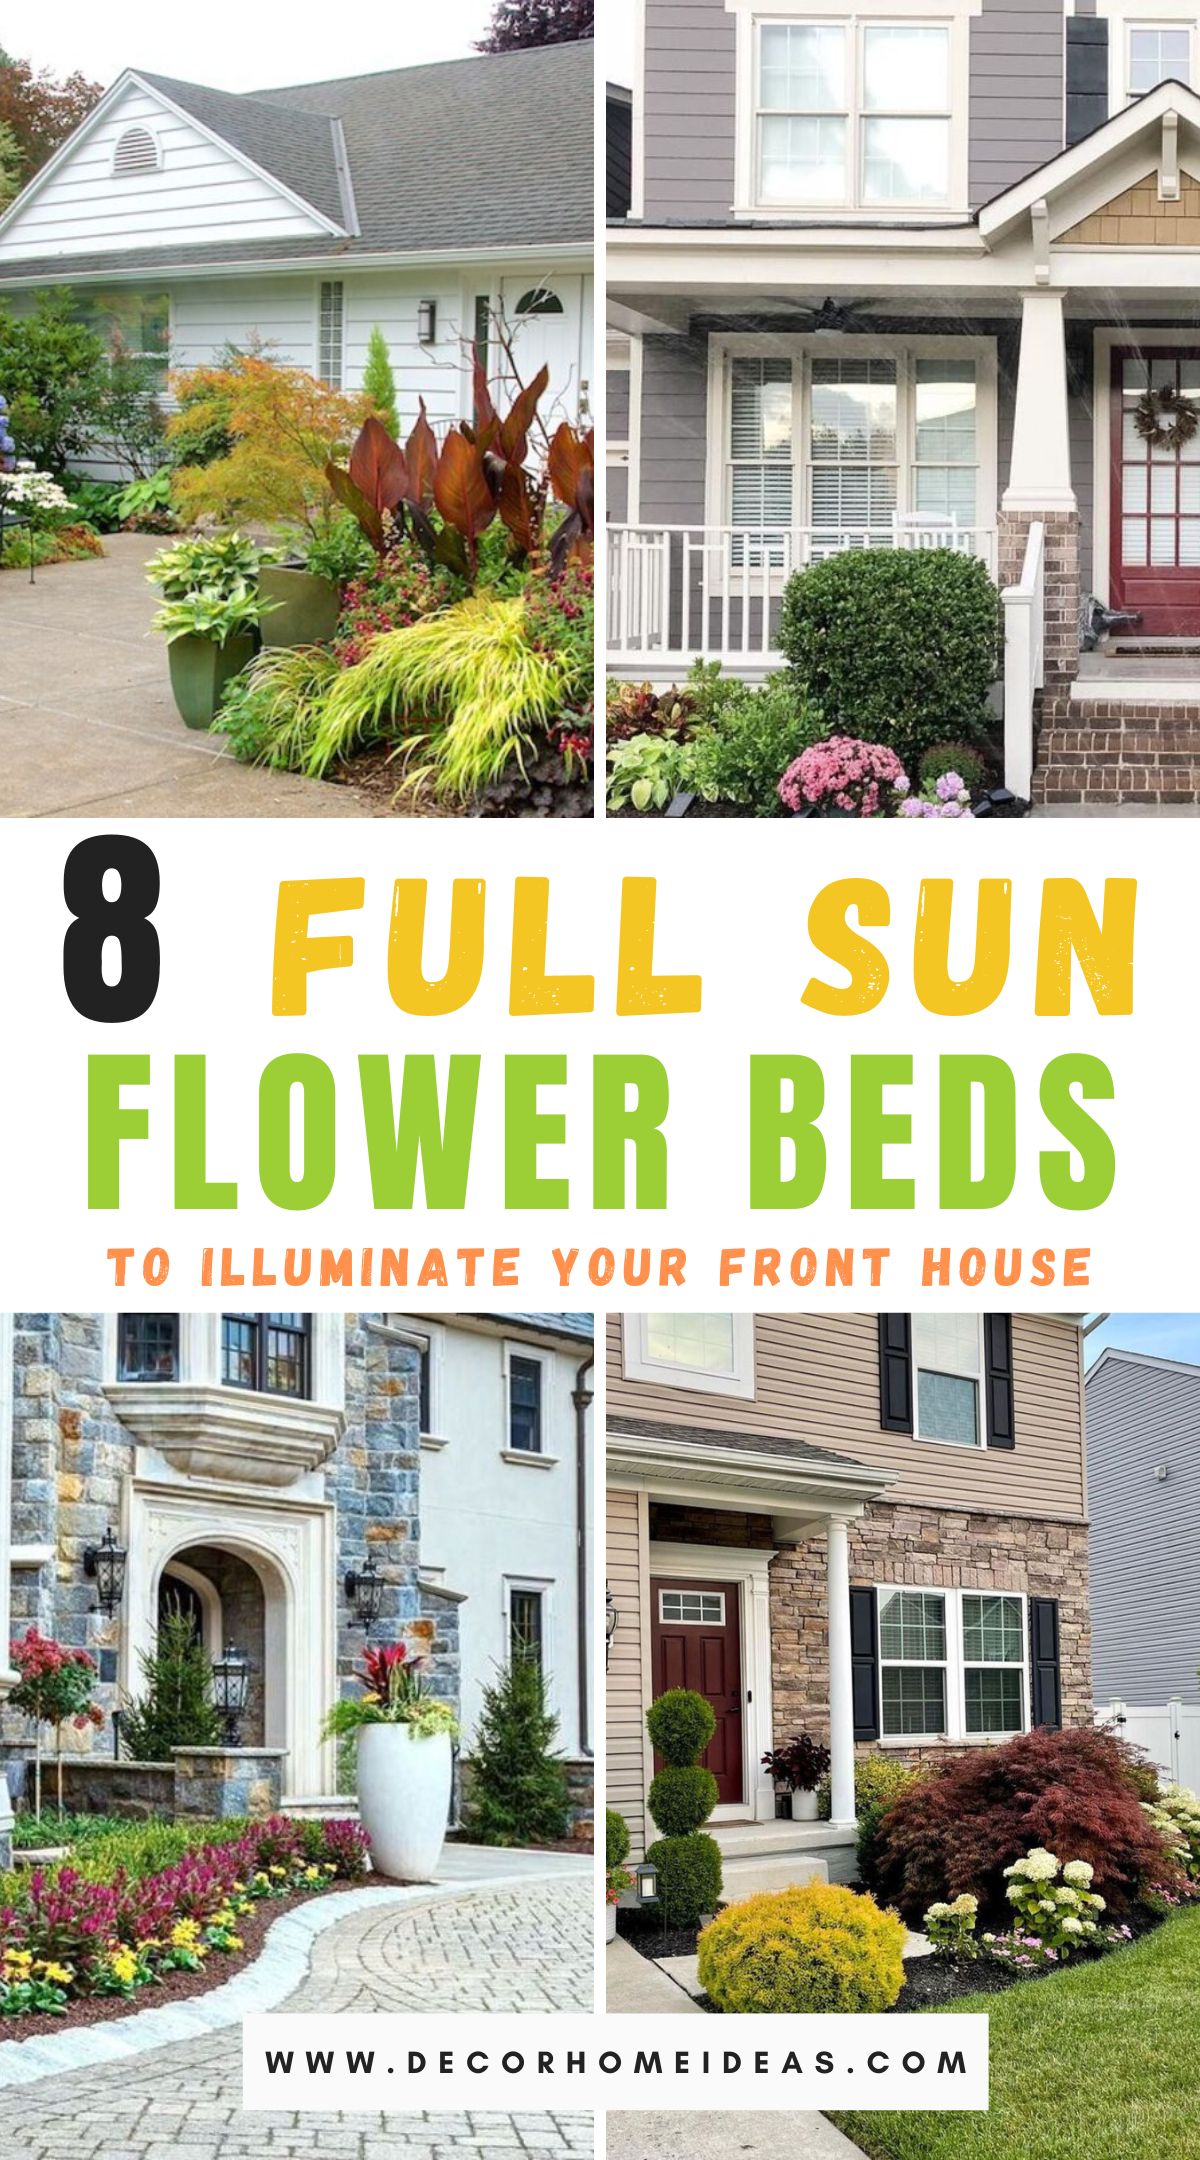 Elevate your curb appeal with these 8 stunning flower beds designed to thrive in full sun. From vibrant blooms to lush foliage, discover captivating arrangements that will brighten your front house and create a welcoming atmosphere.